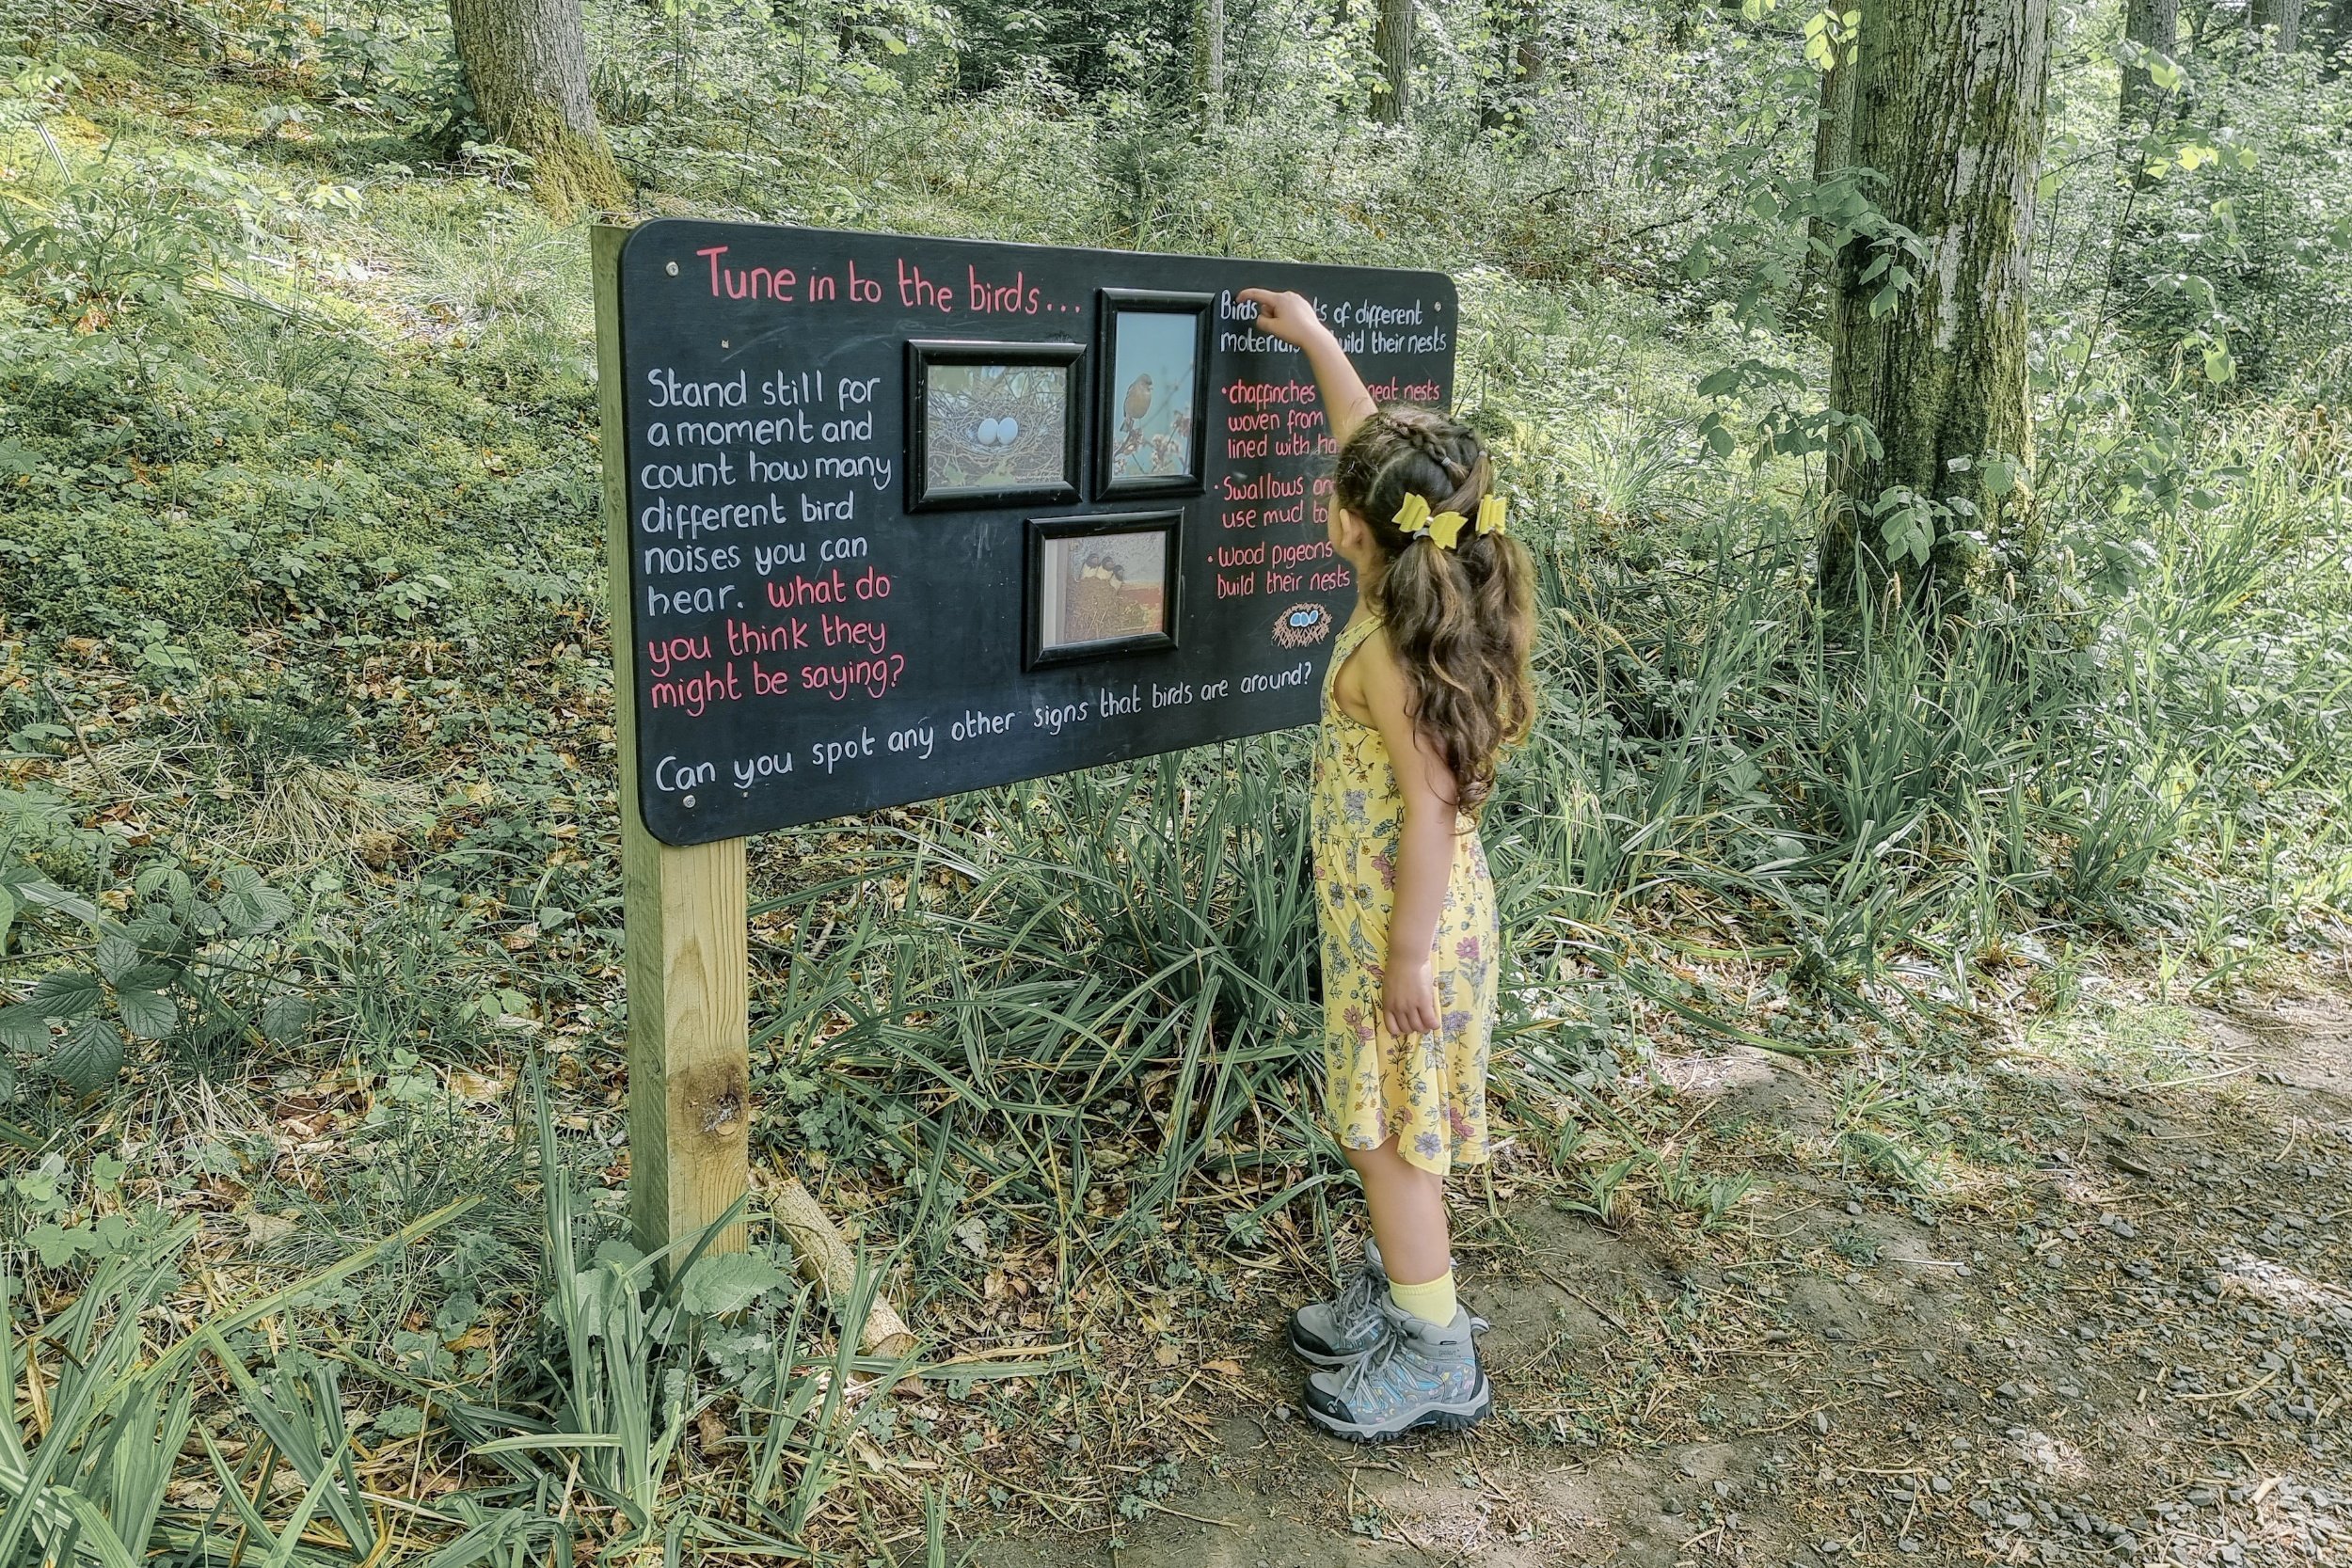 Pickle is stood in a yellow floral dress with yellow bows in her hair. She is facing a blackboard with writing on it trying to read what is says. 